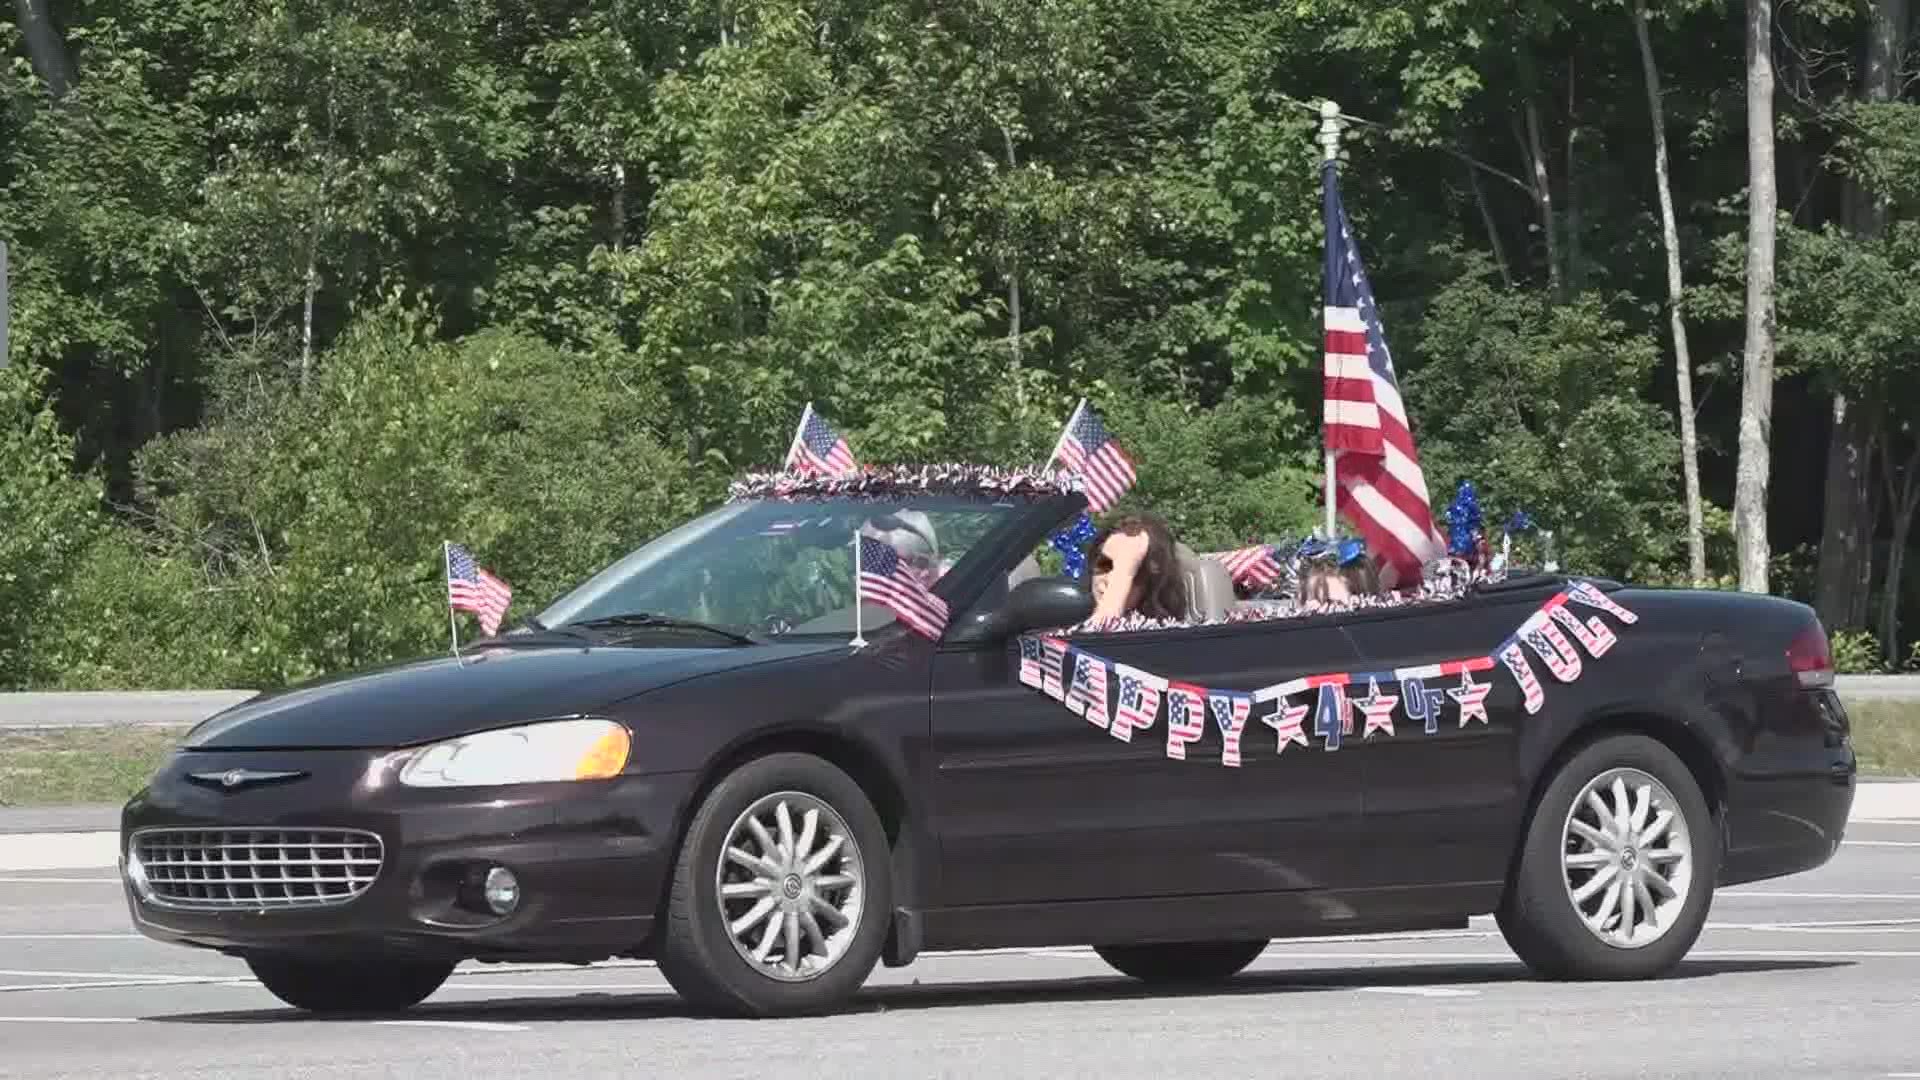 Sanford residents who were disappointed by the lack of July 4th festivities organized a homemade parade.